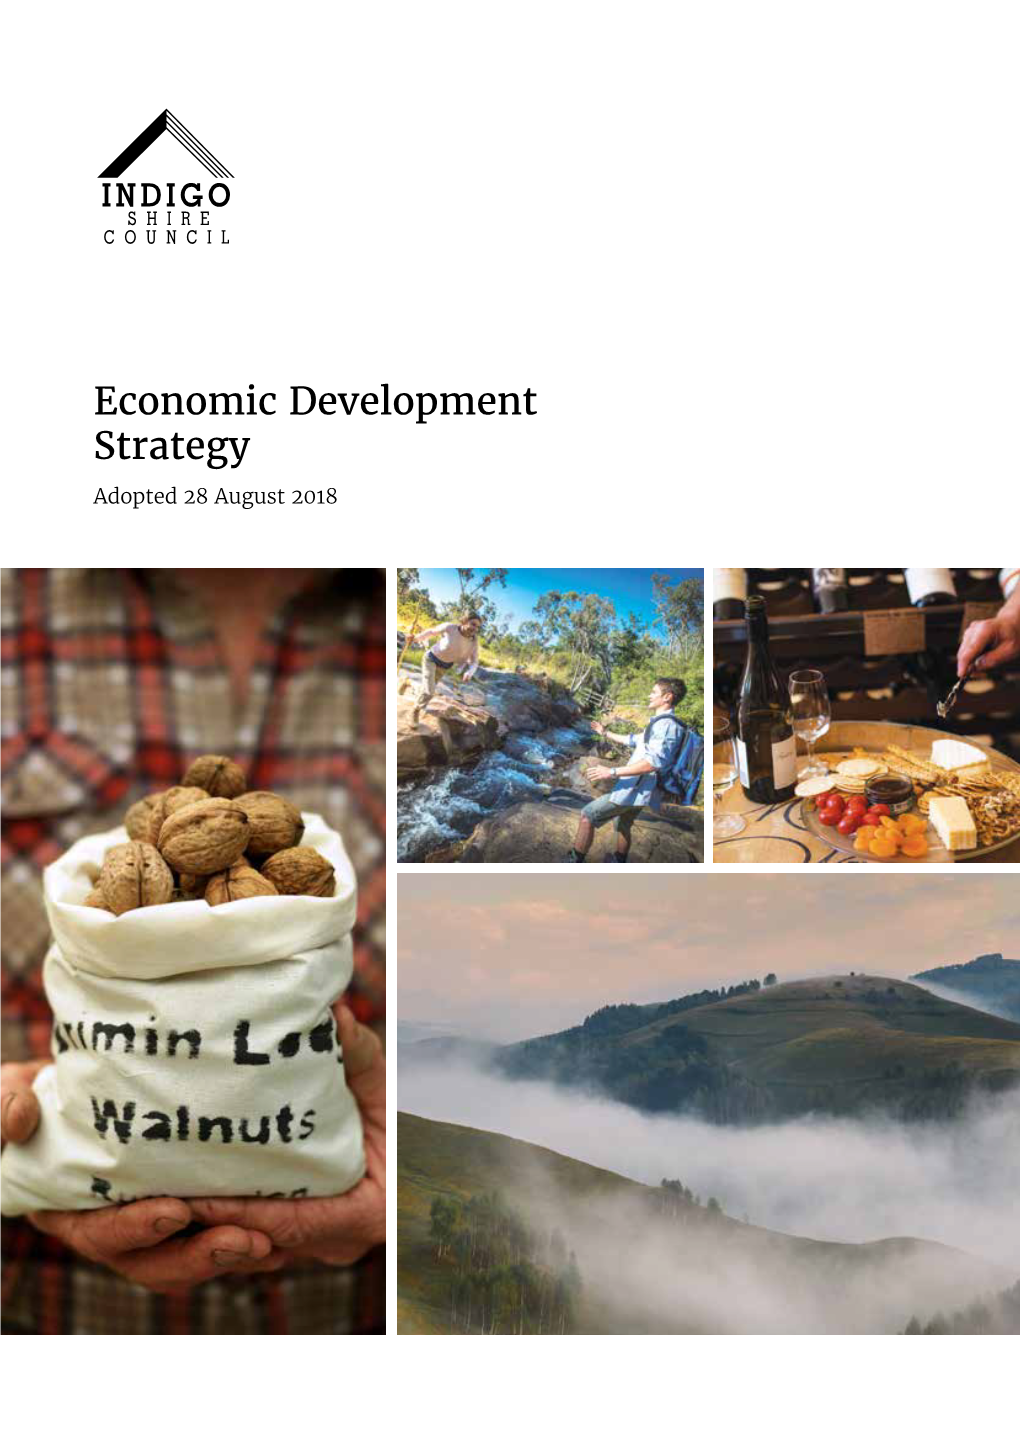 Economic Development Strategy Adopted 28 August 2018